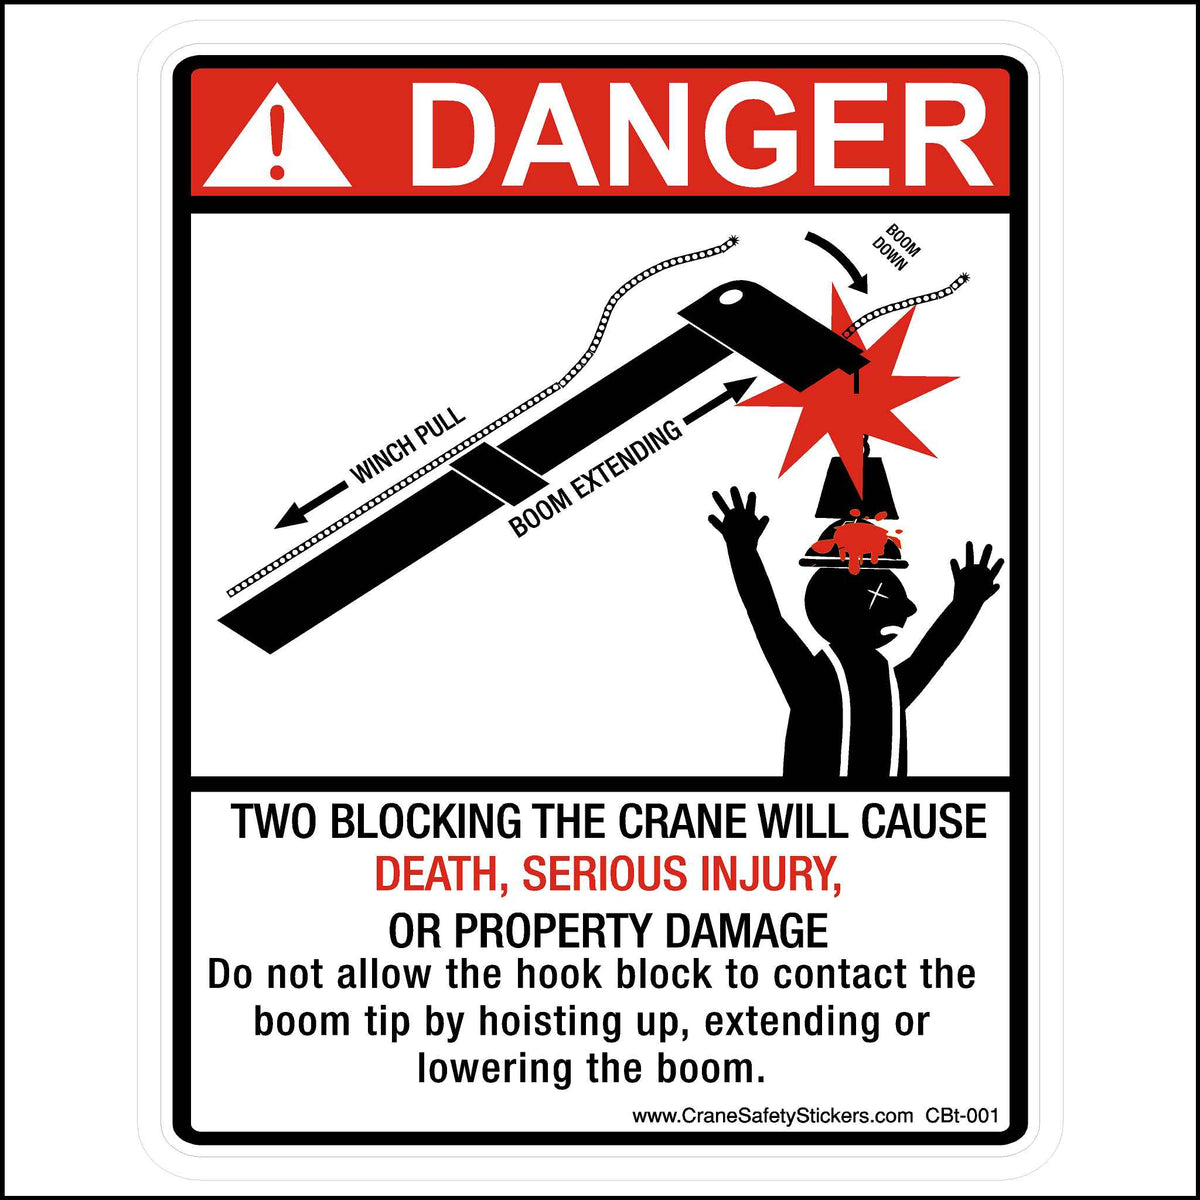 Two Blocking Danger decal. Printed with, DANGER, Two Blocking The Crane Will Cause Death, Serious Injury, Or Property Damage. Do not allow the hook block to contact the boom tip by hoisting up, extending or lowering the boom.